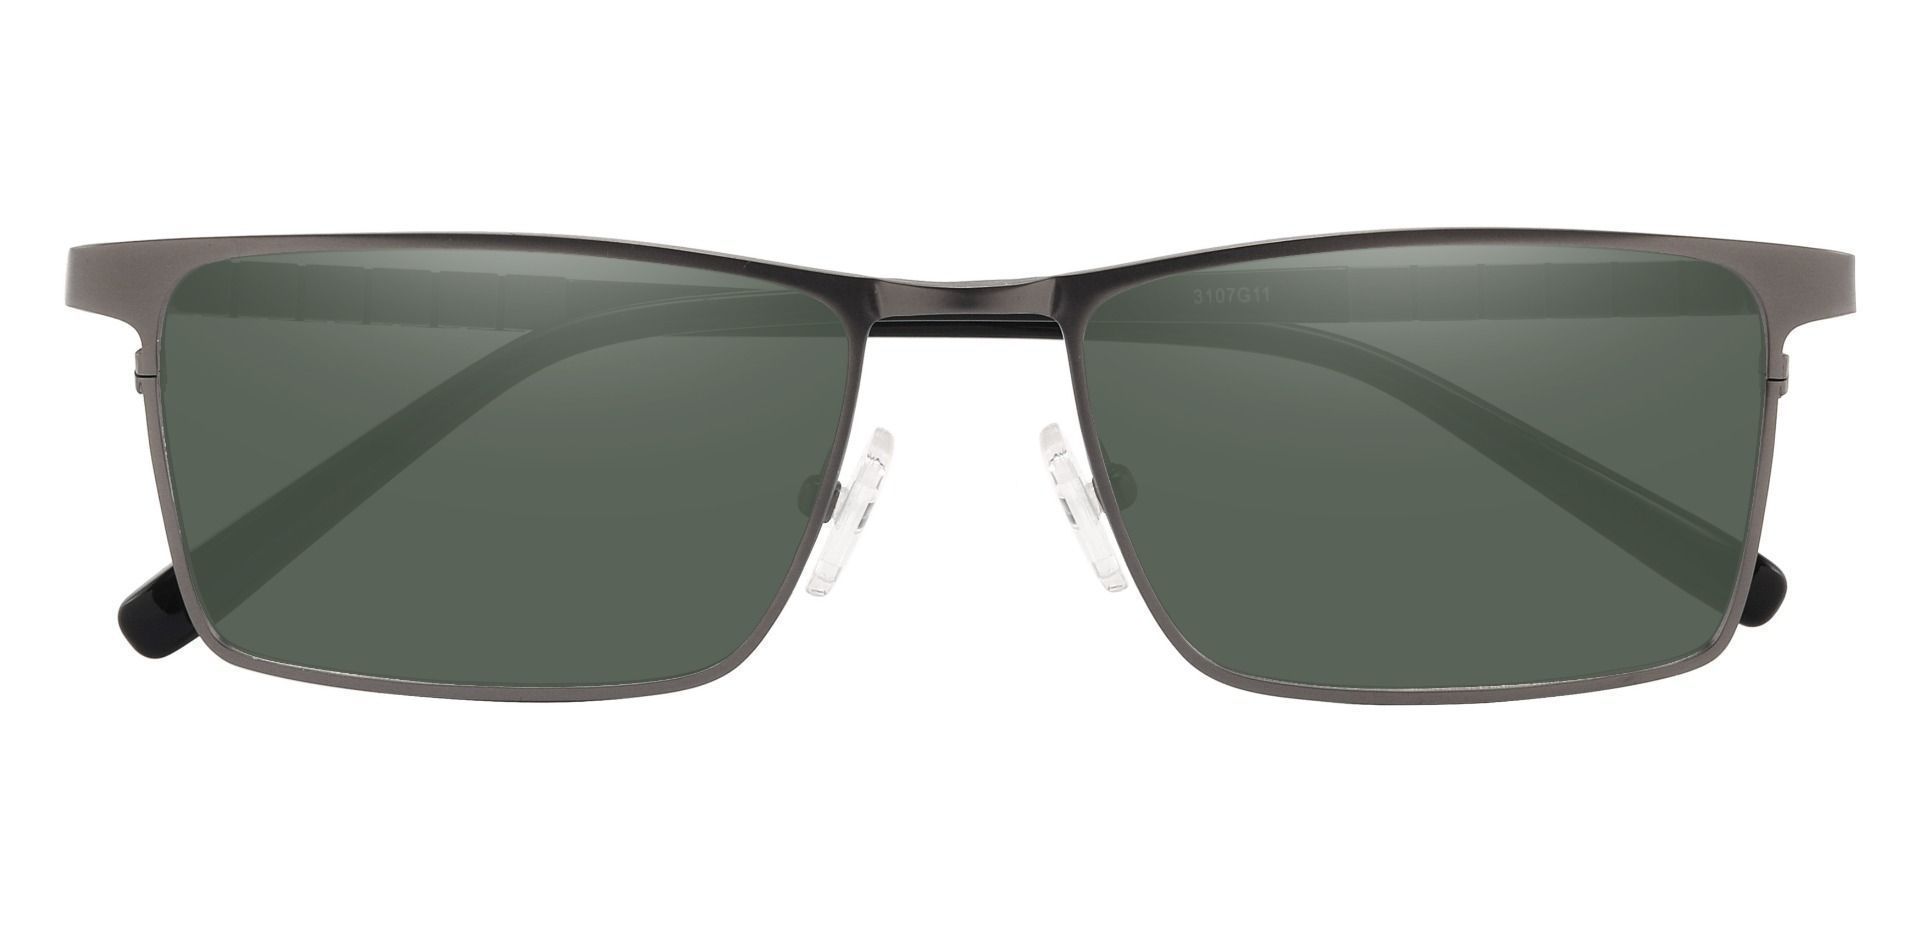 Cheshire Rectangle Reading Sunglasses - Gray Frame With Green Lenses